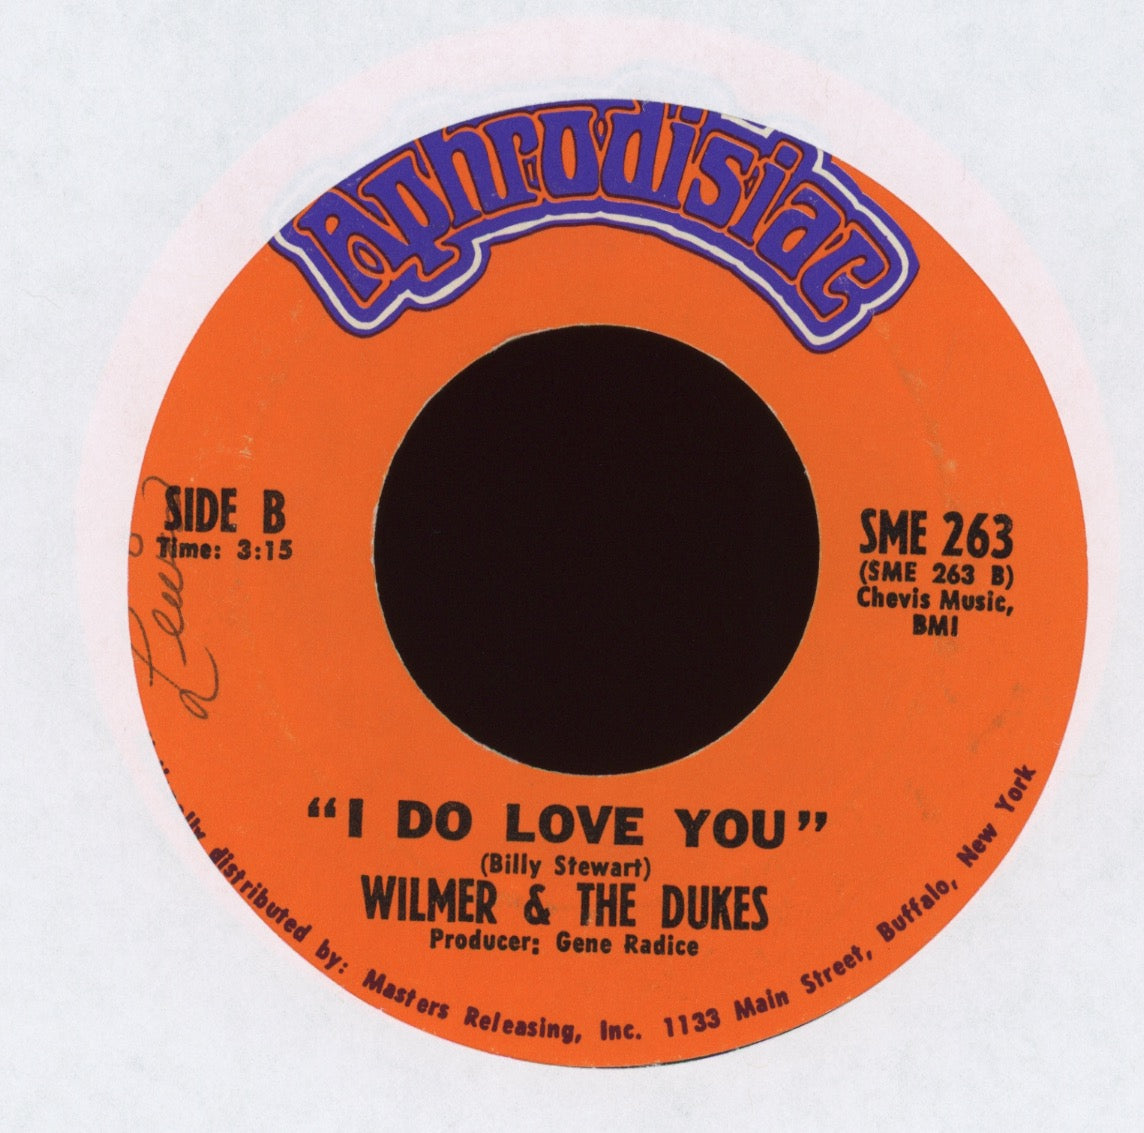 Wilmer & The Dukes - Get Out Of My Life, Women on Aphrodisiac Funk 45 Breaks